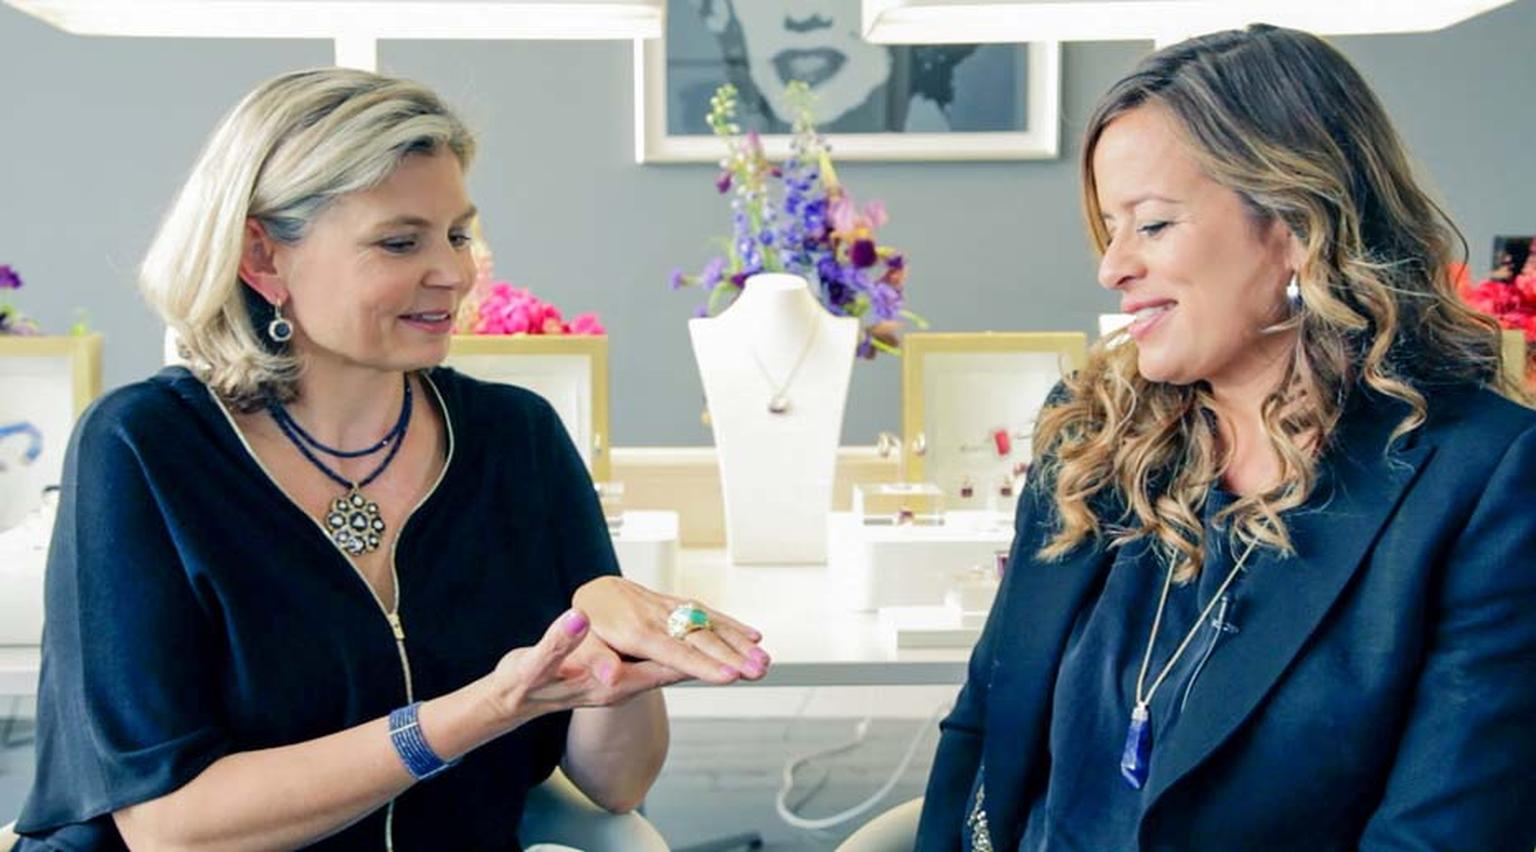 Jade Jagger and Maria Doulton discuss Jade's newest Jaipur jewellery collection, which features traditional Indian enamelwork